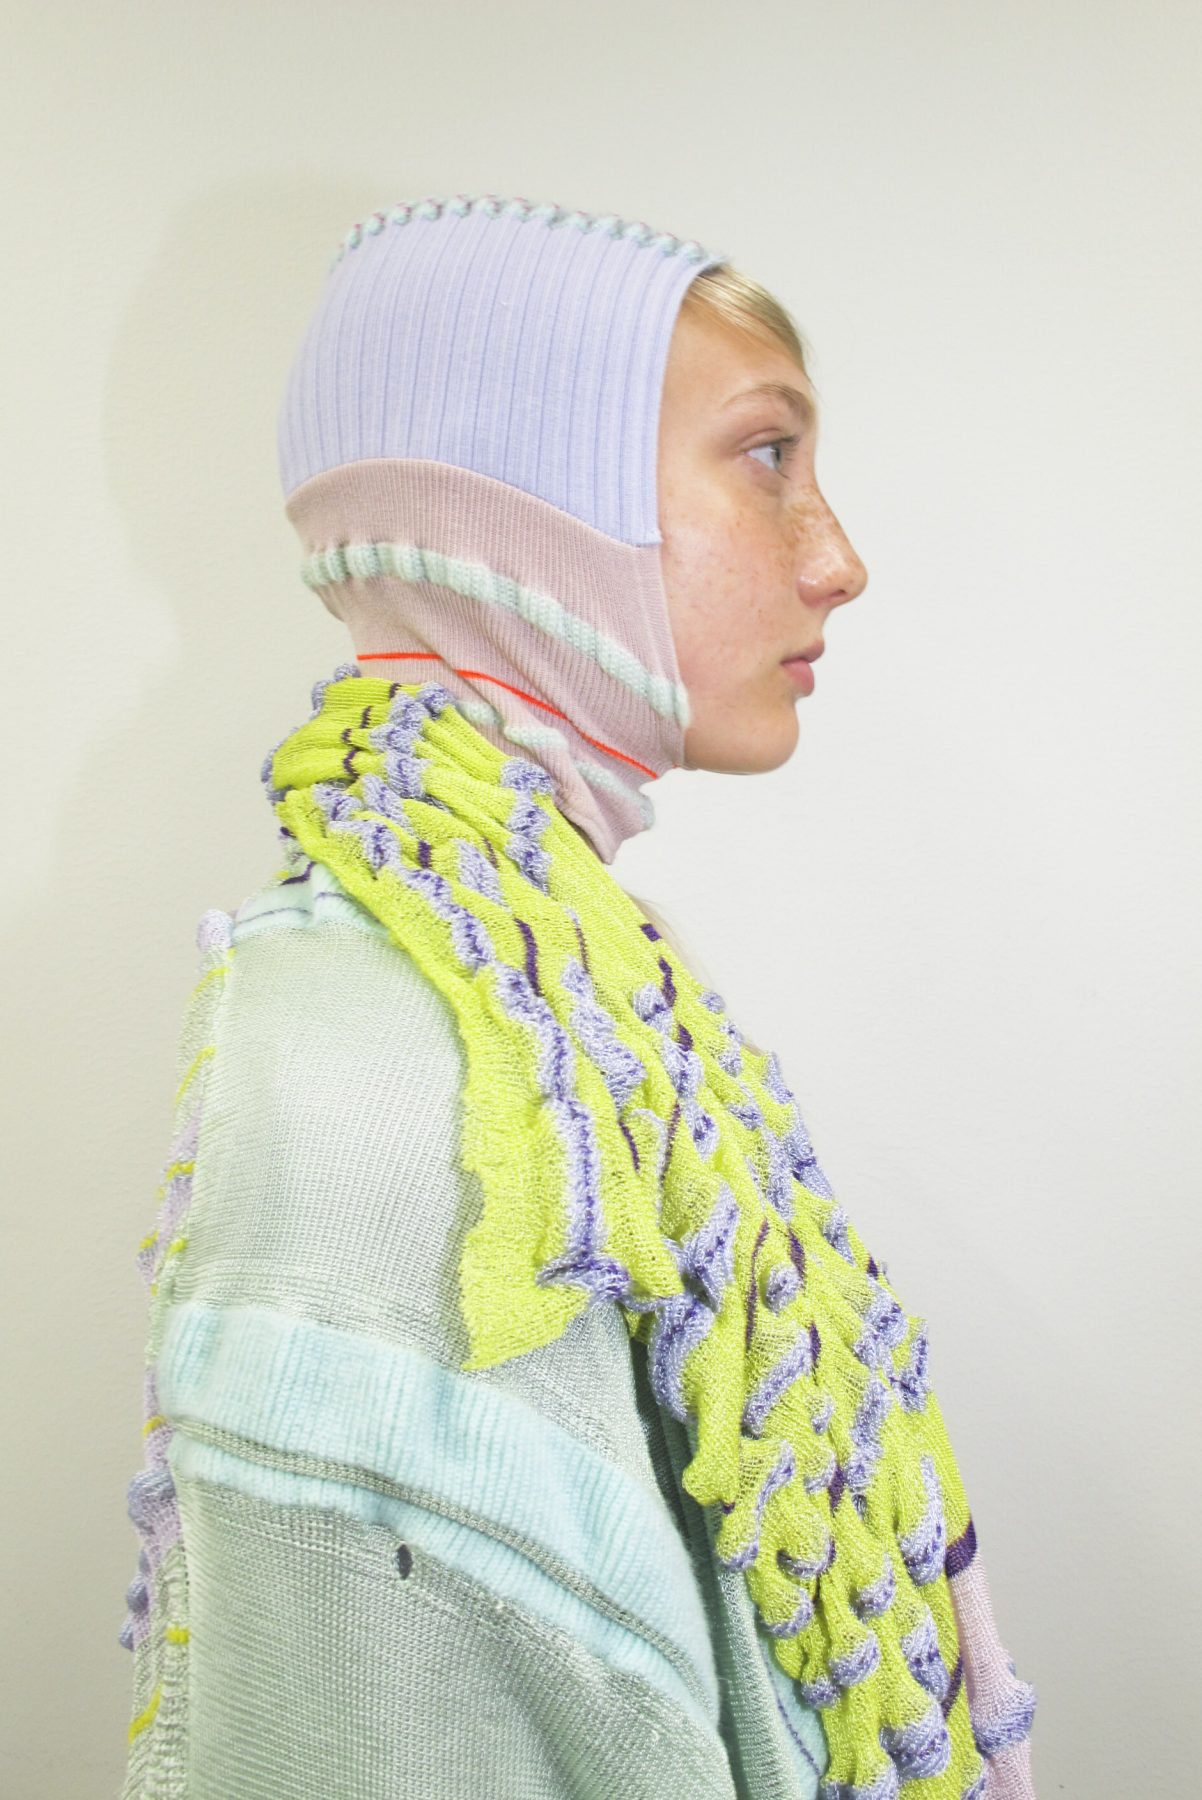 Model wearing knitted striped balaclava and long striped scarf